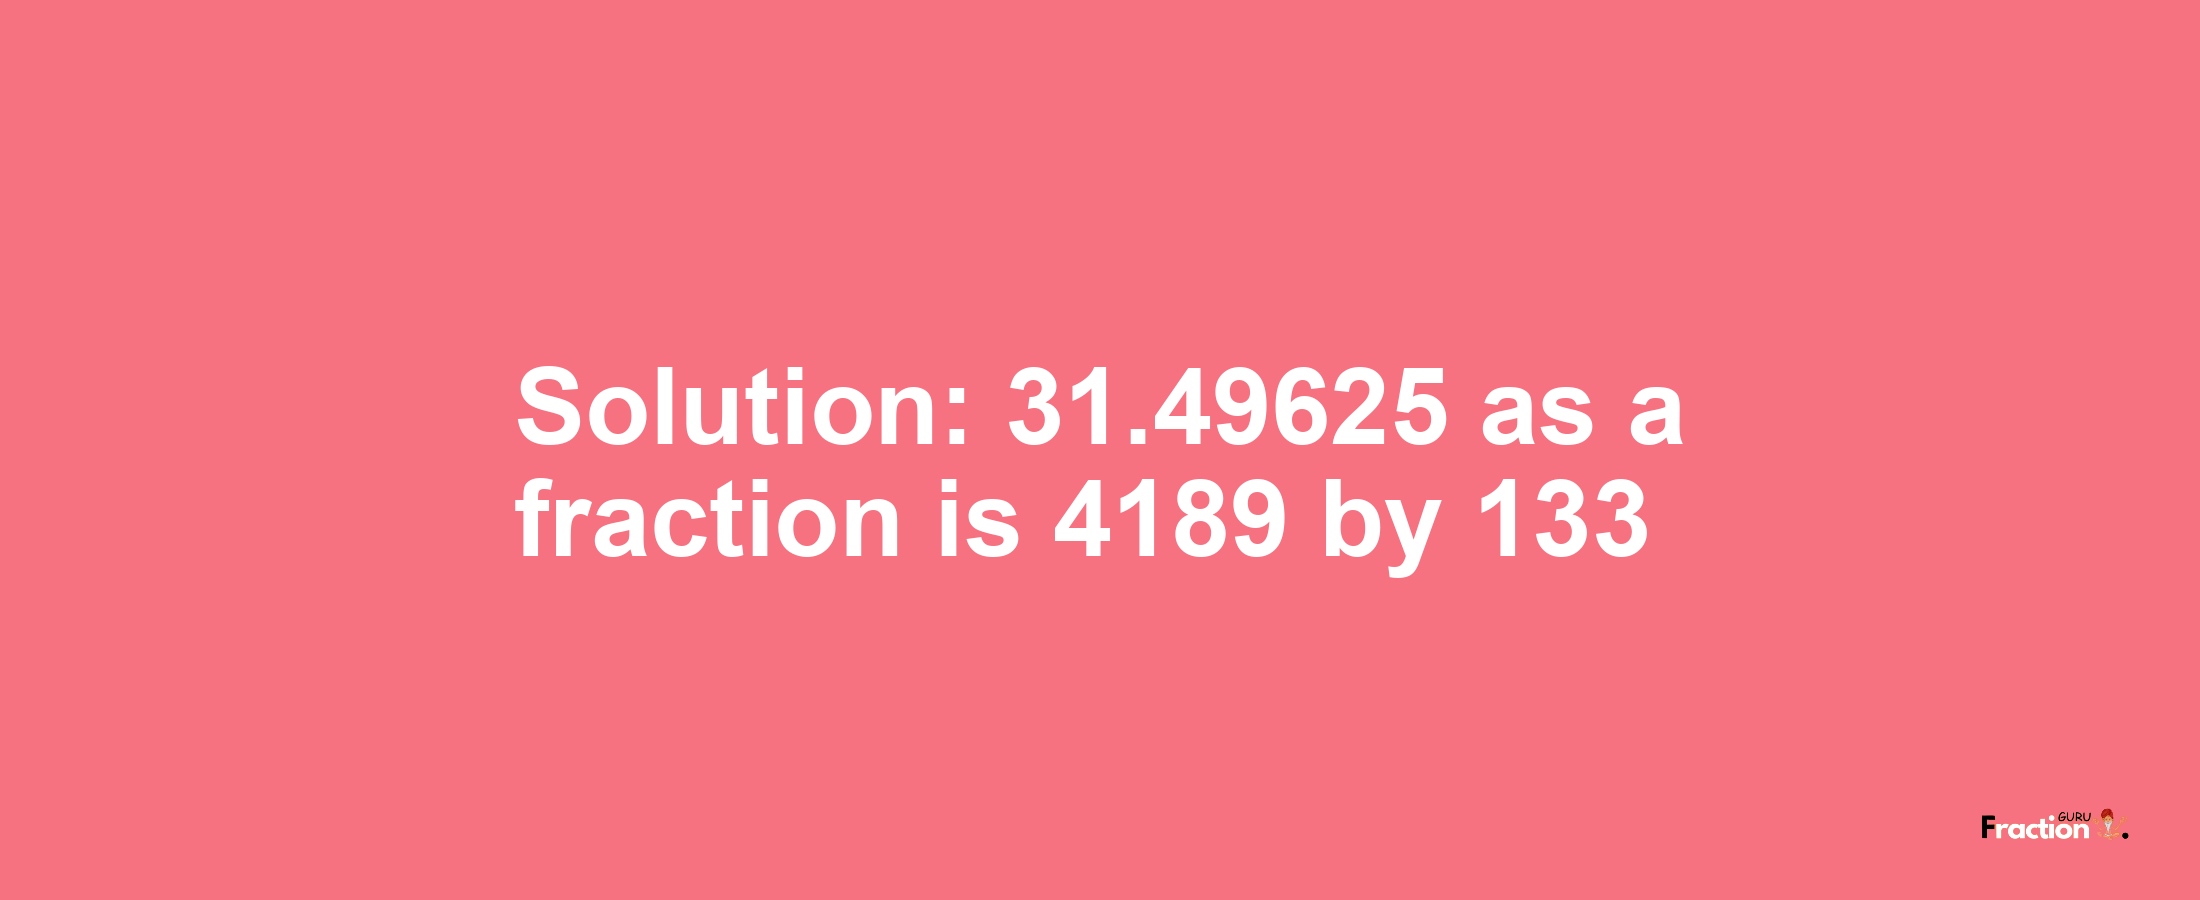 Solution:31.49625 as a fraction is 4189/133